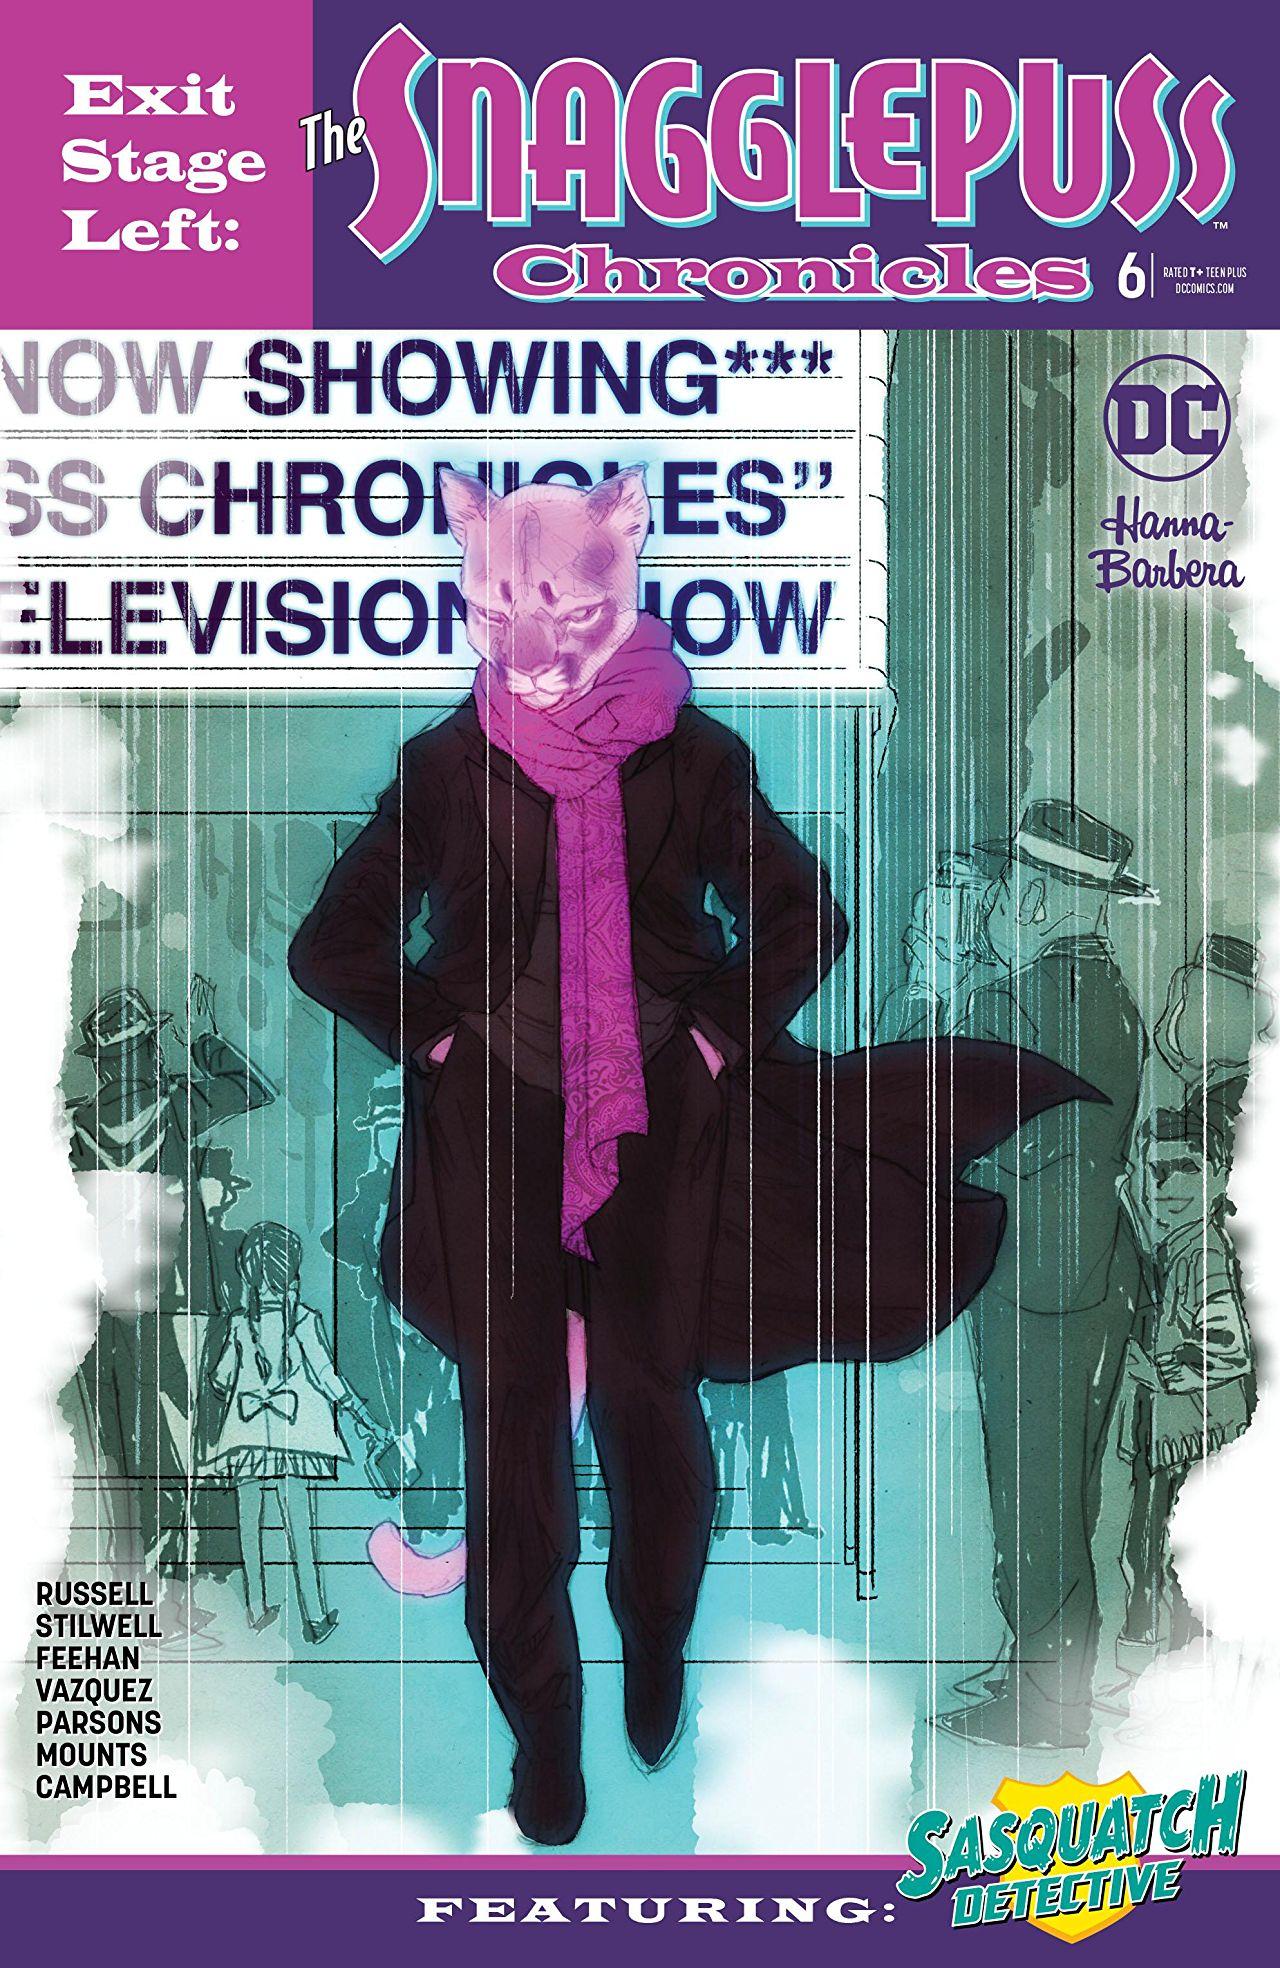 Exit Stage Left: The Snagglepuss Chronicles Vol. 1 #6